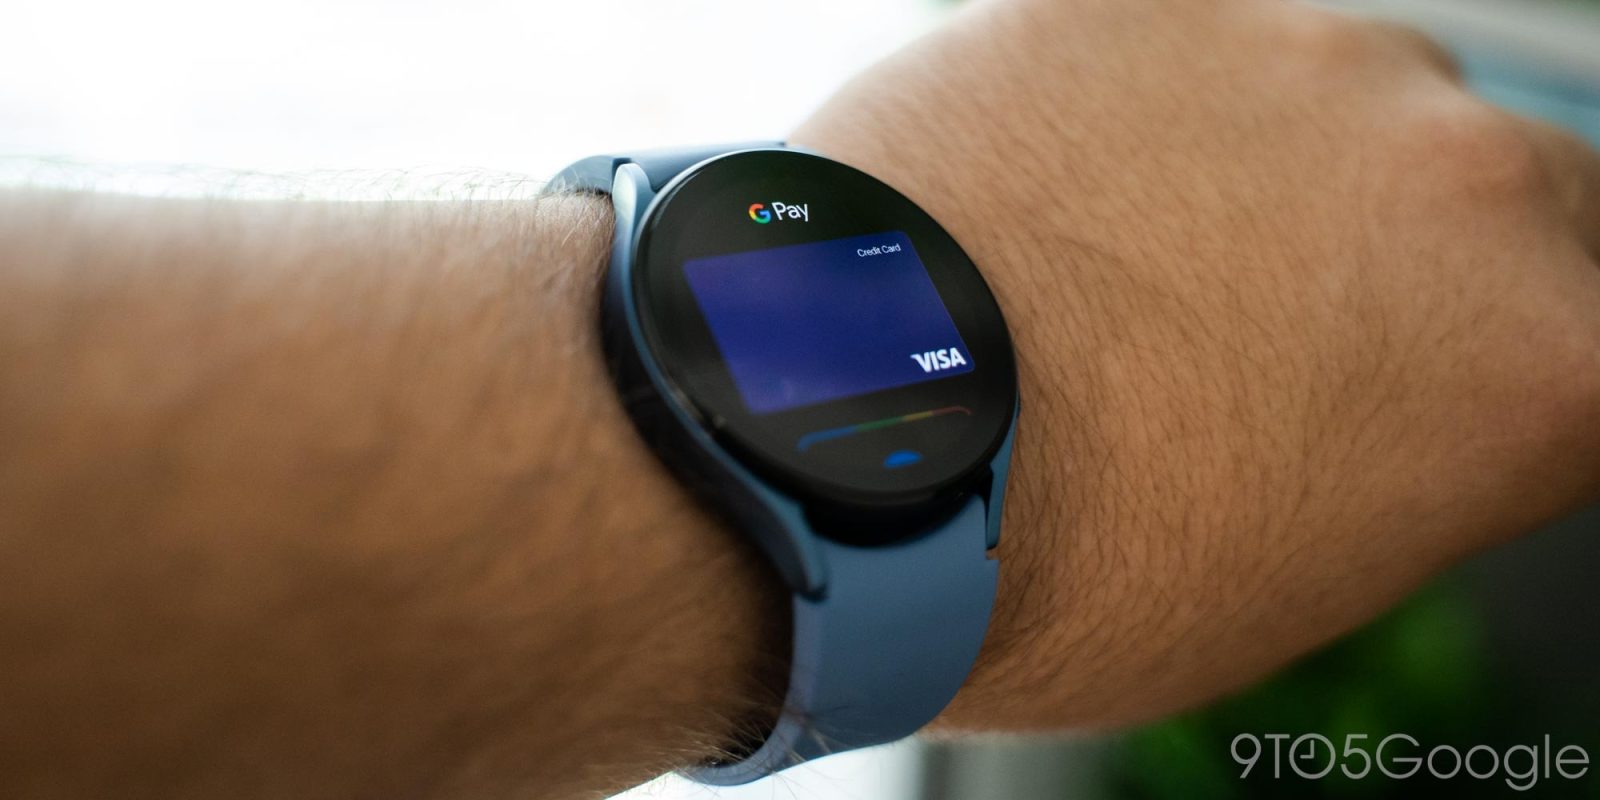 Open Samsung Pay on your Galaxy phone or smart watch